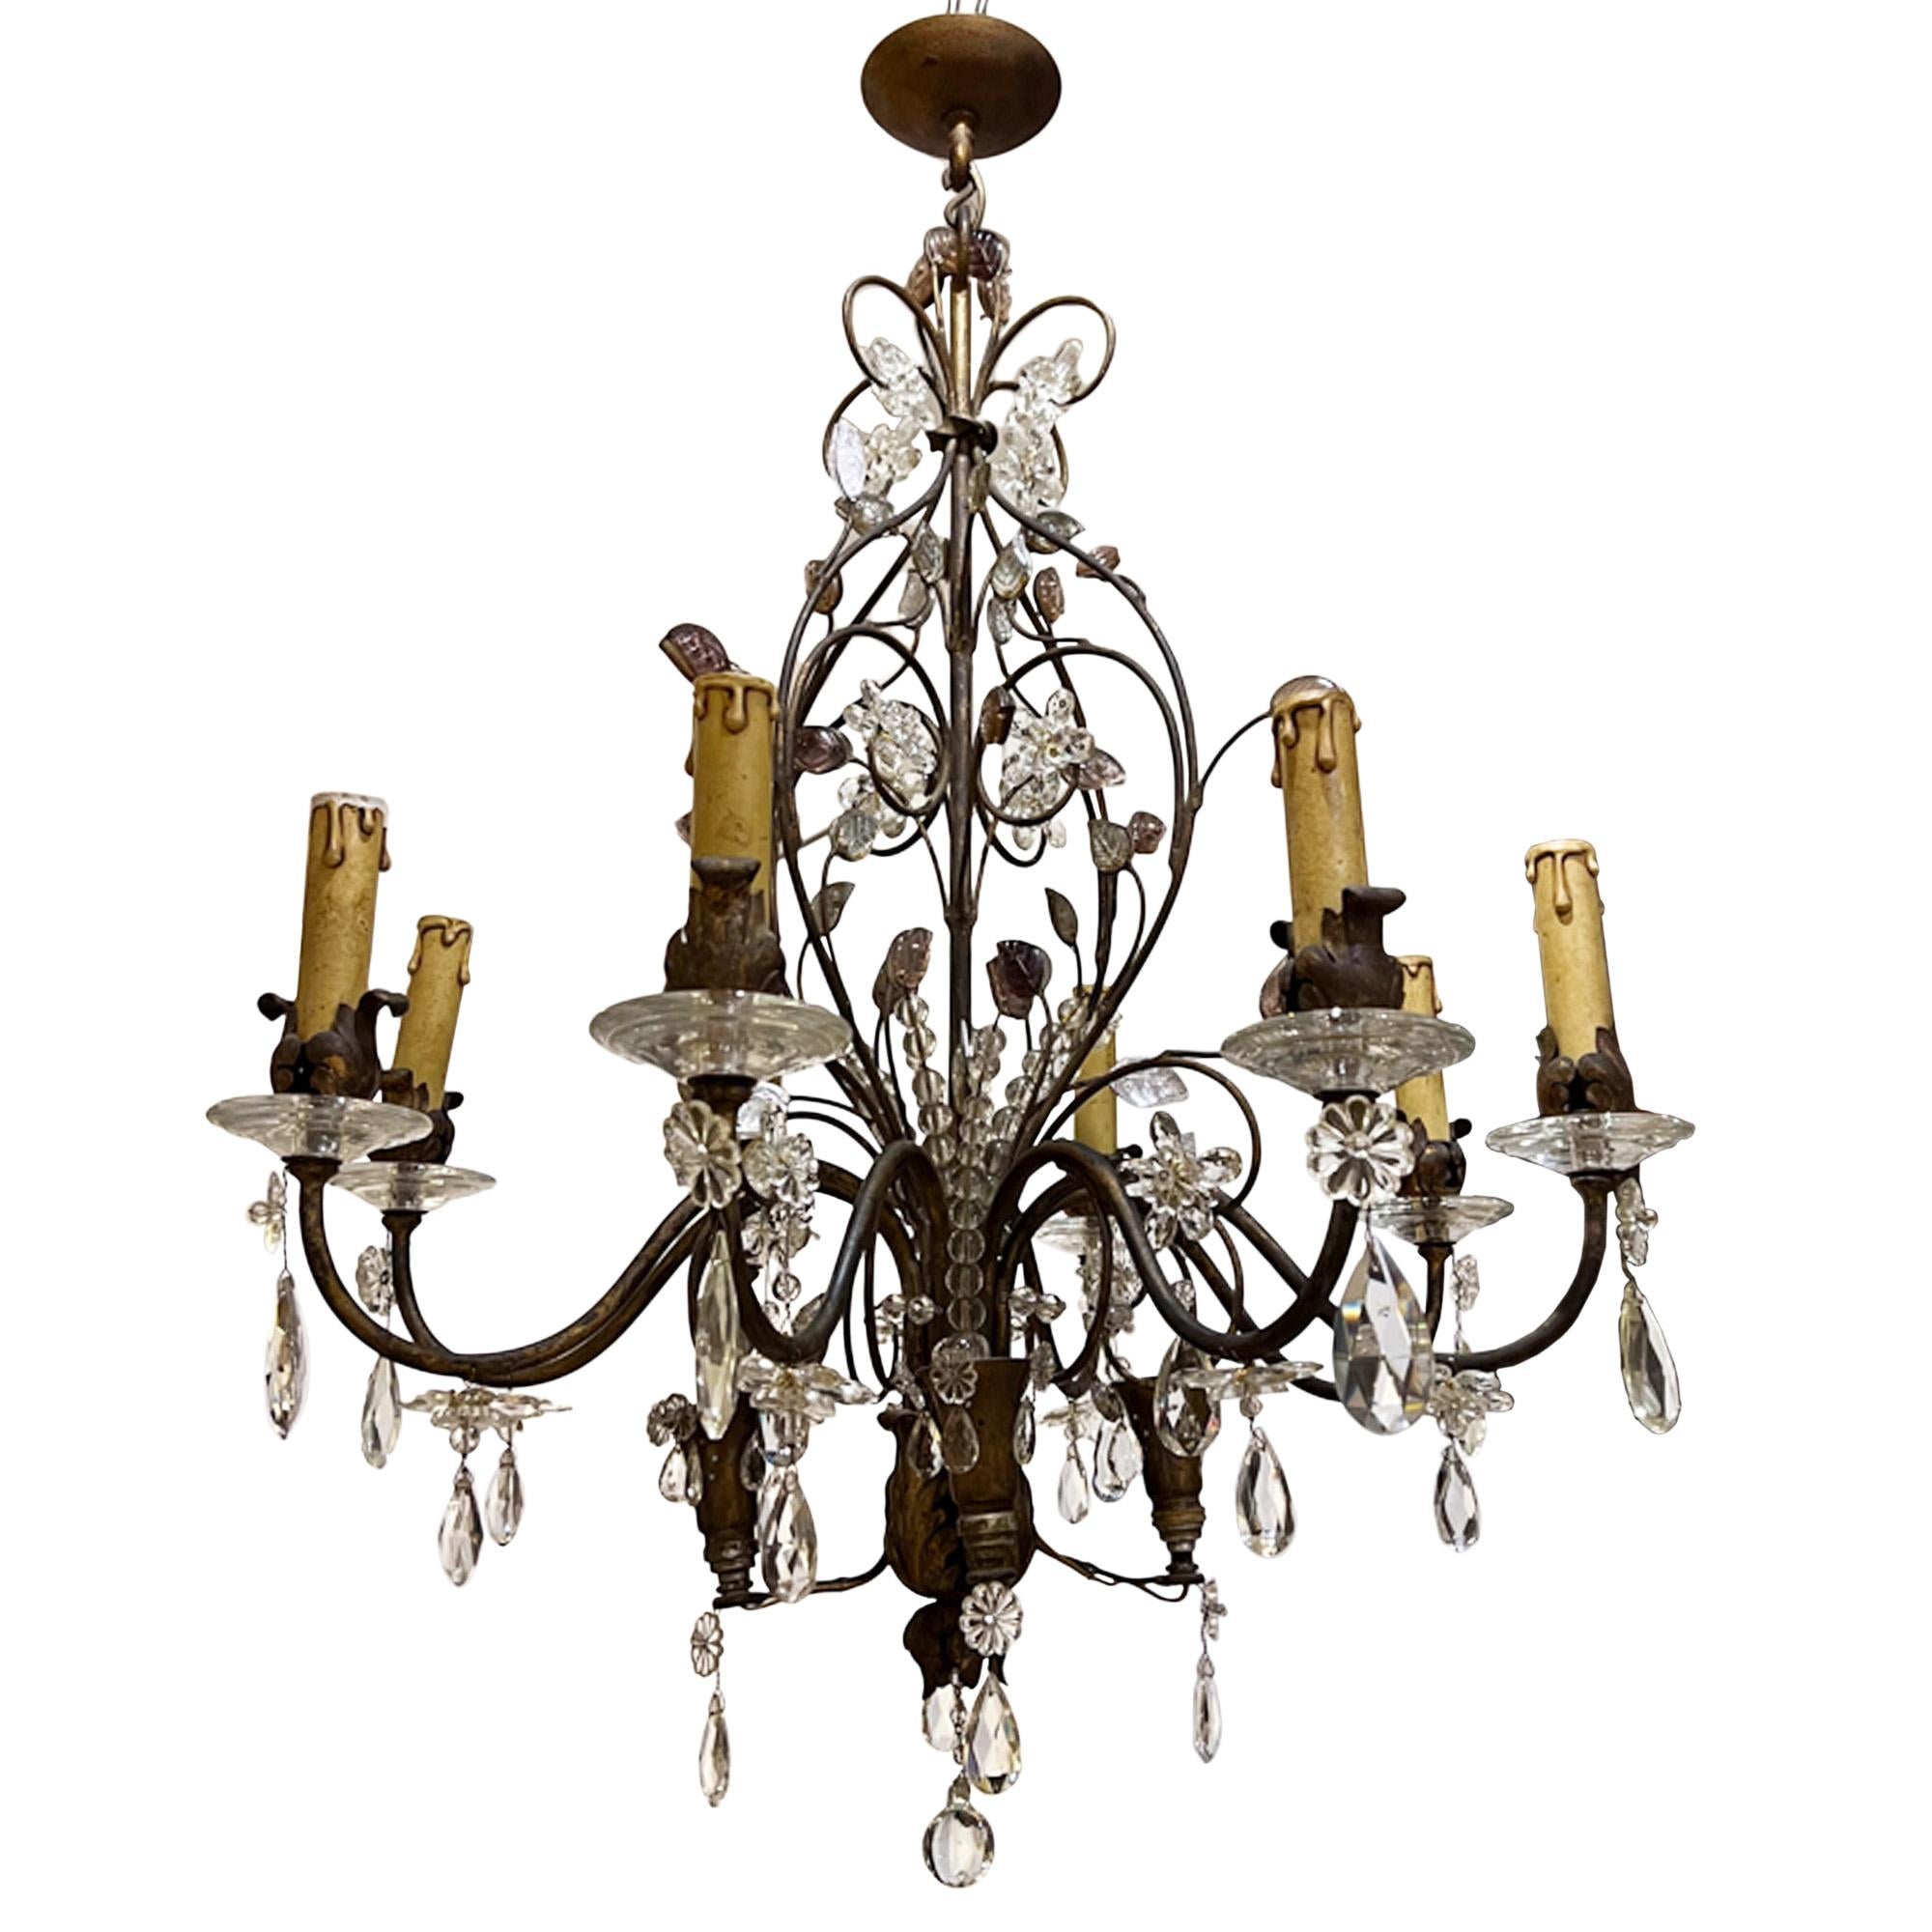 This charming chandelier was made in France in the 1950s in the style of Maison Baguès. 

The elegant gilt metal frame is trimmed with glass and crystal flowers and leaves. There are 8 arms and 4 further bulb fittings clustered at the bottom. 

Some